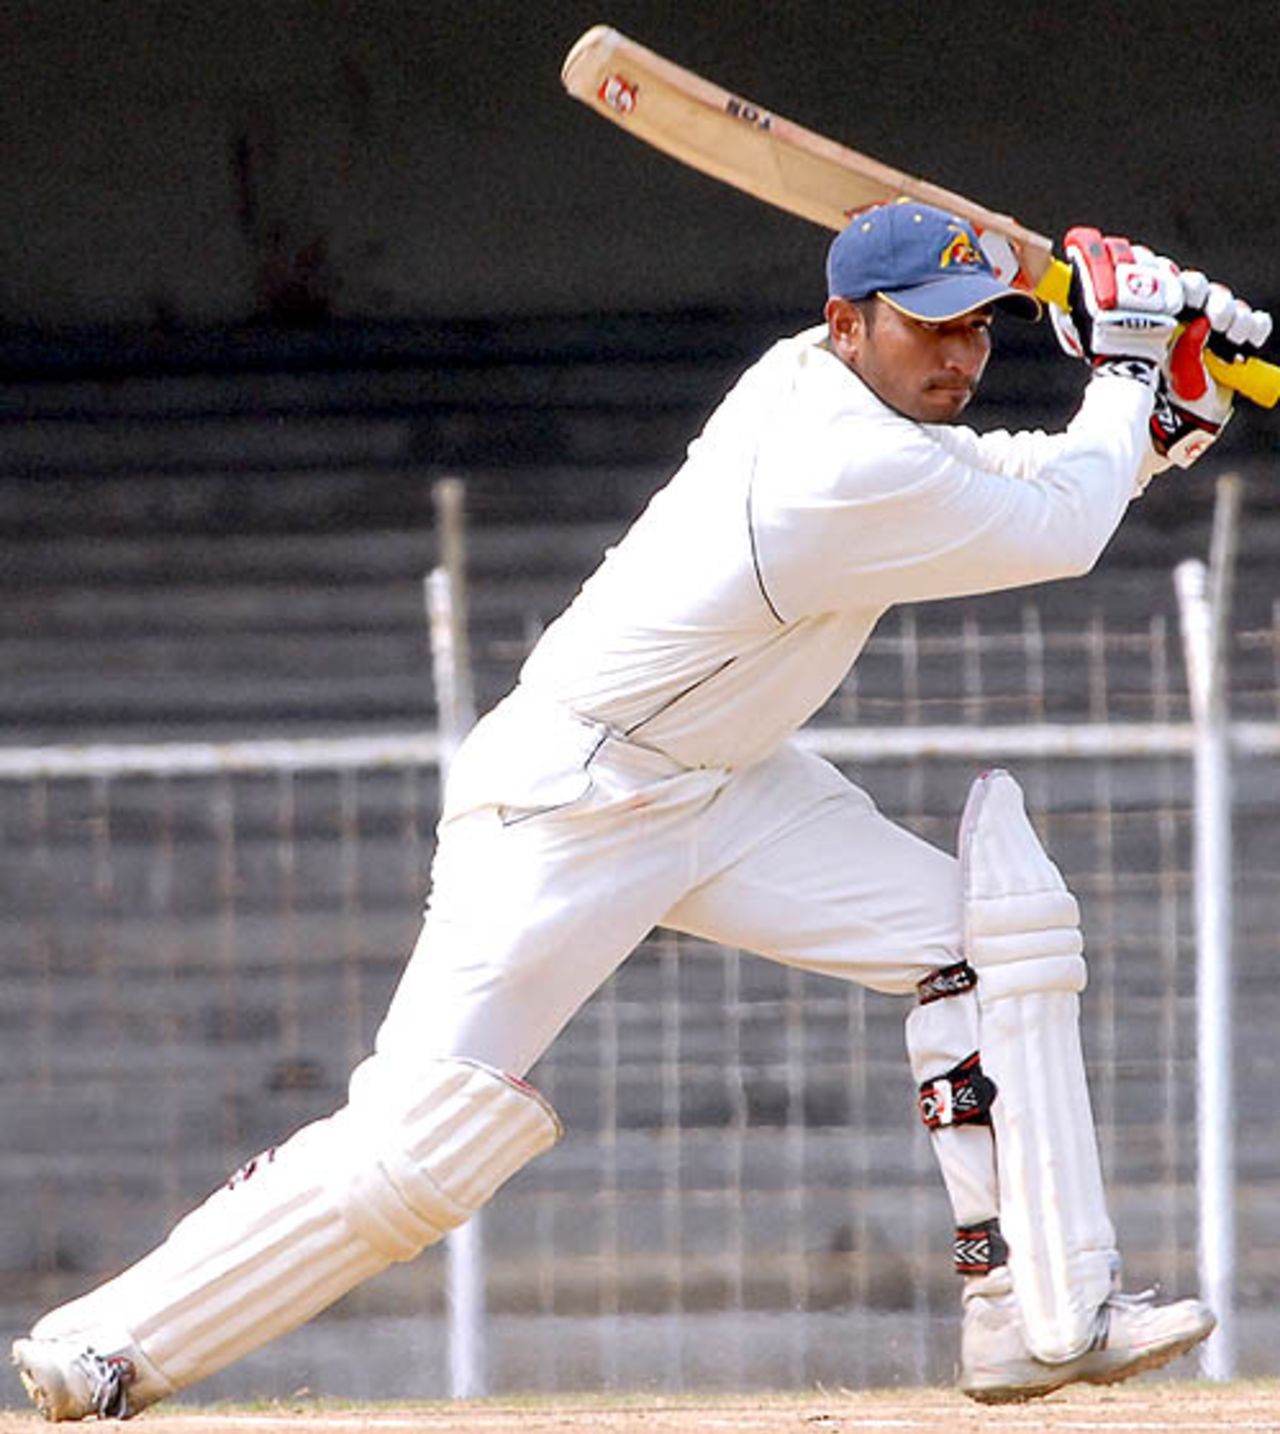 Rajasthan's Vineet Saxena scored 71 on the final day, Tamil Nadu v Rajasthan, Ranji Trophy Super League, Group A, Chennai, 4th day, December 20, 2007 